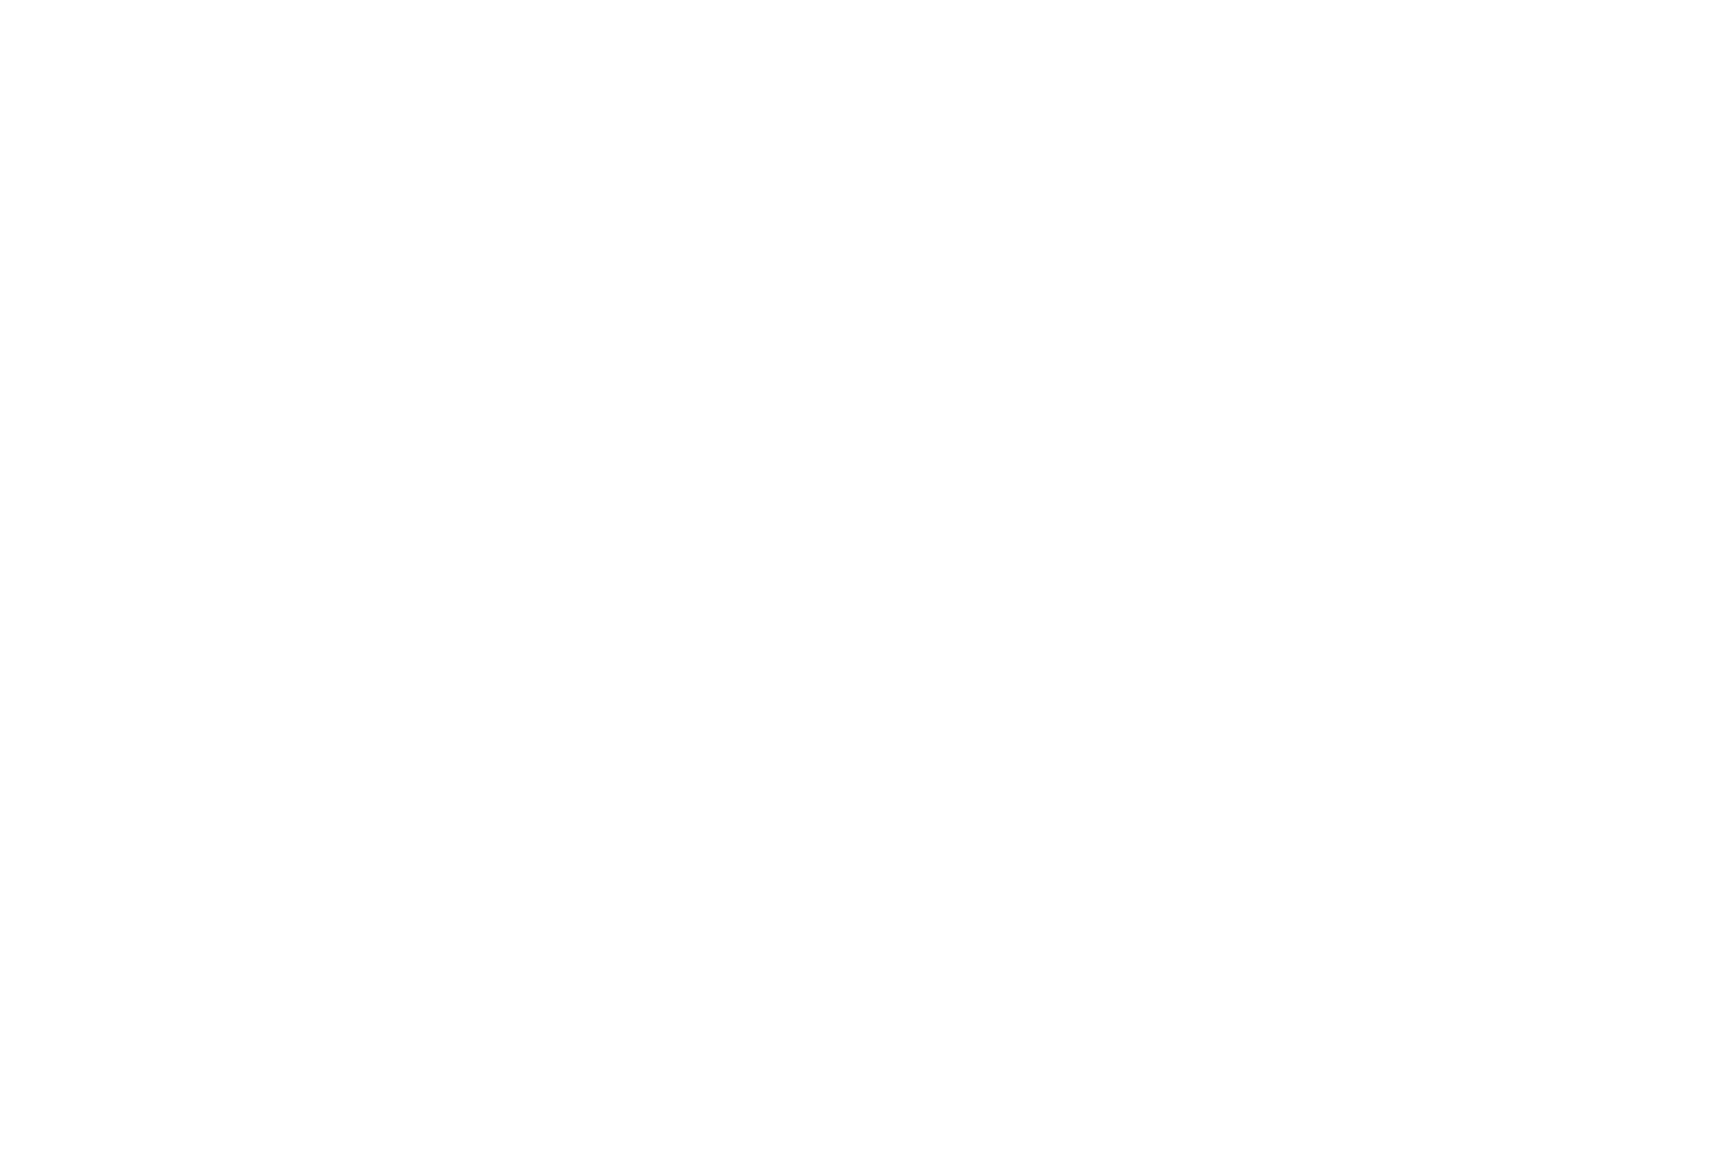 GRAND JURY AWARD FOR BEST SHORT DOCUMENTARY - UNAFF United Nations Association Film Festival - 2021 (3).png